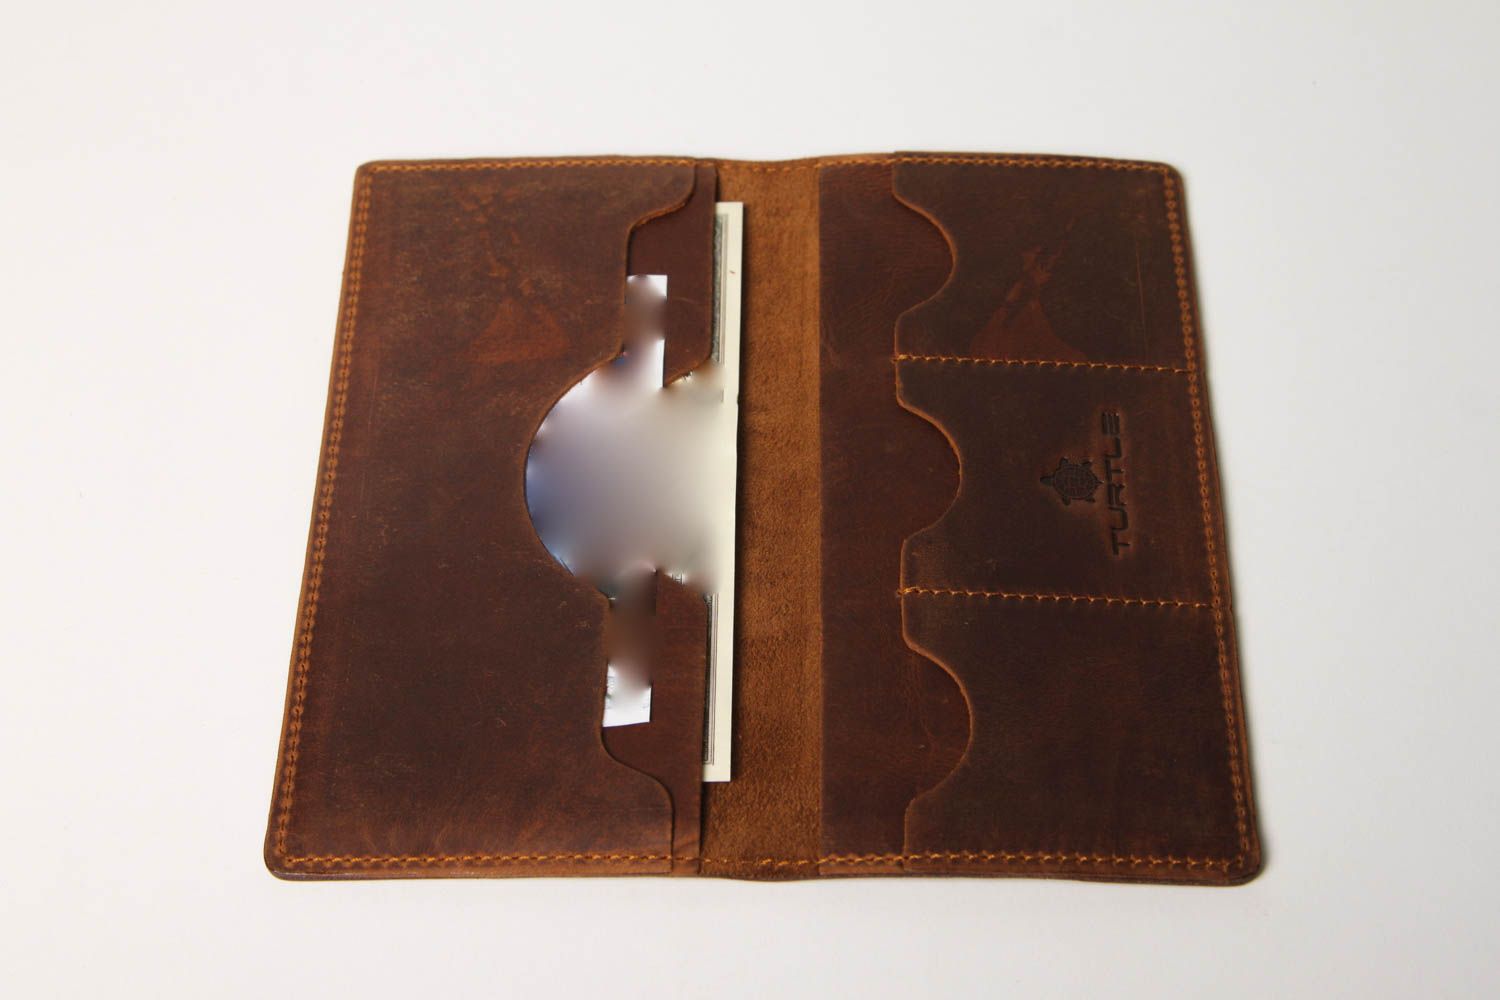 Unusual handmade leather wallet fashion accessories for men best gifts for him photo 4